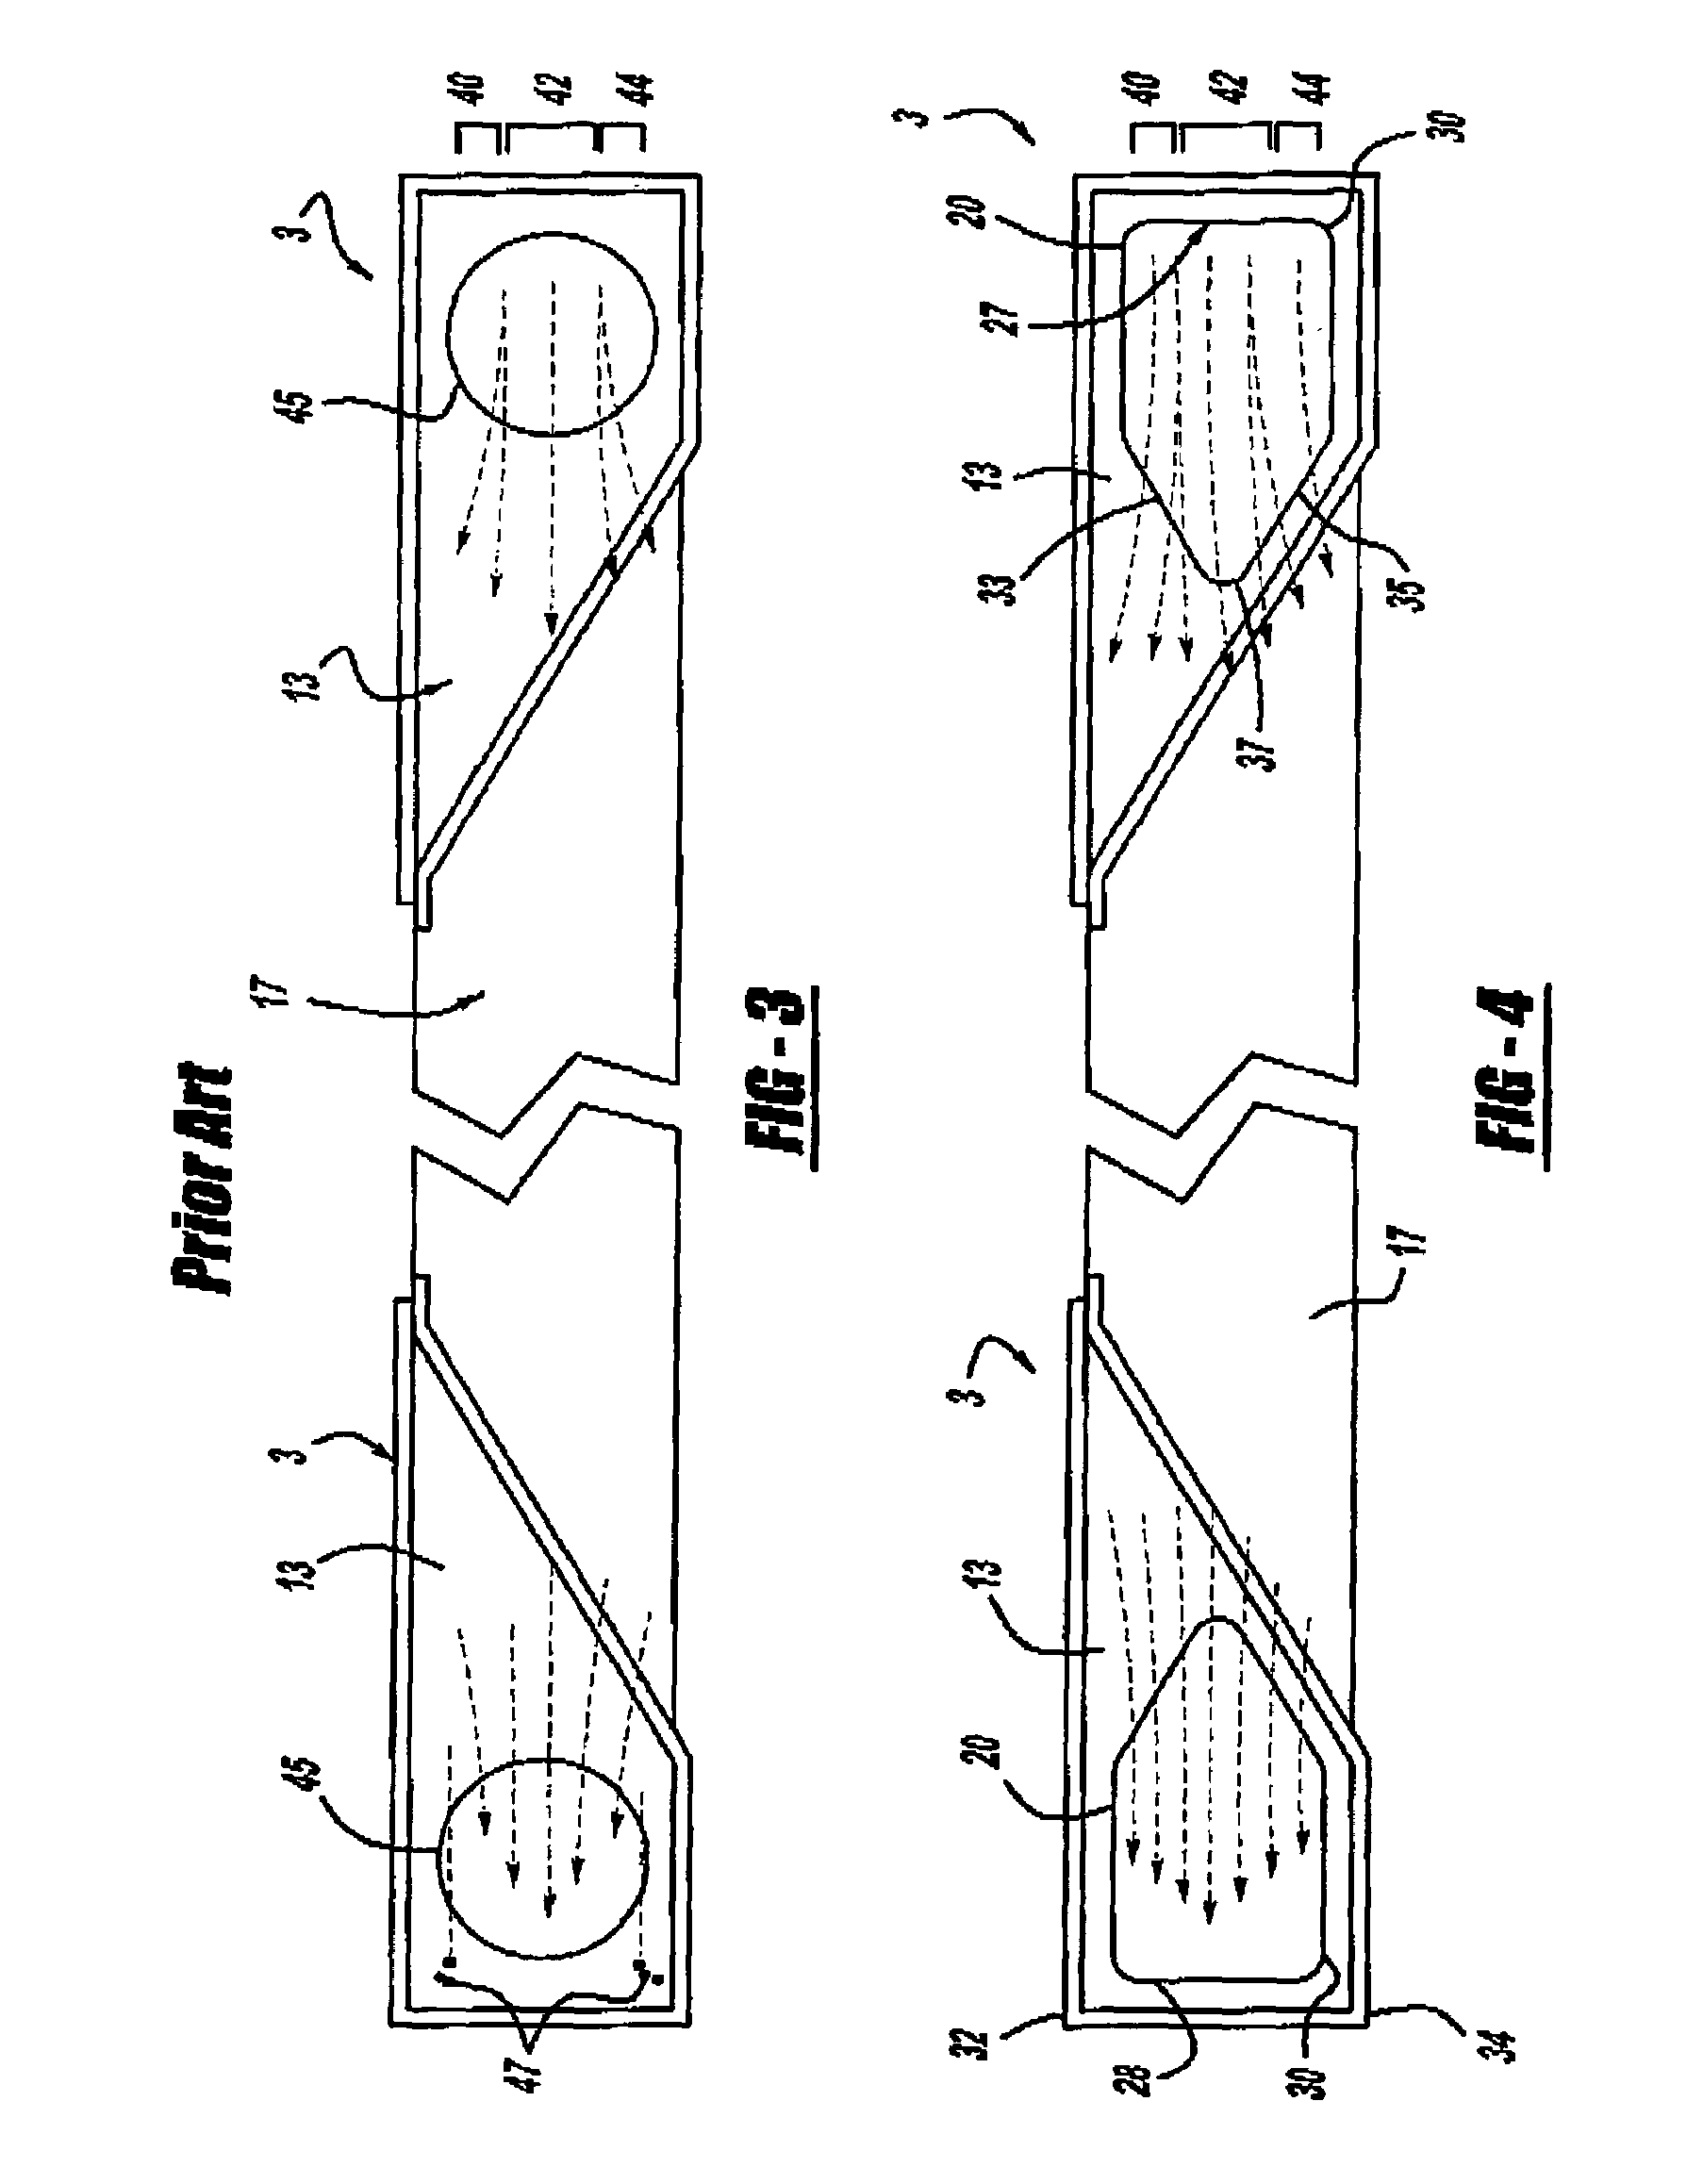 Method and apparatus for enhancing the heat transfer efficiency of a keel cooler